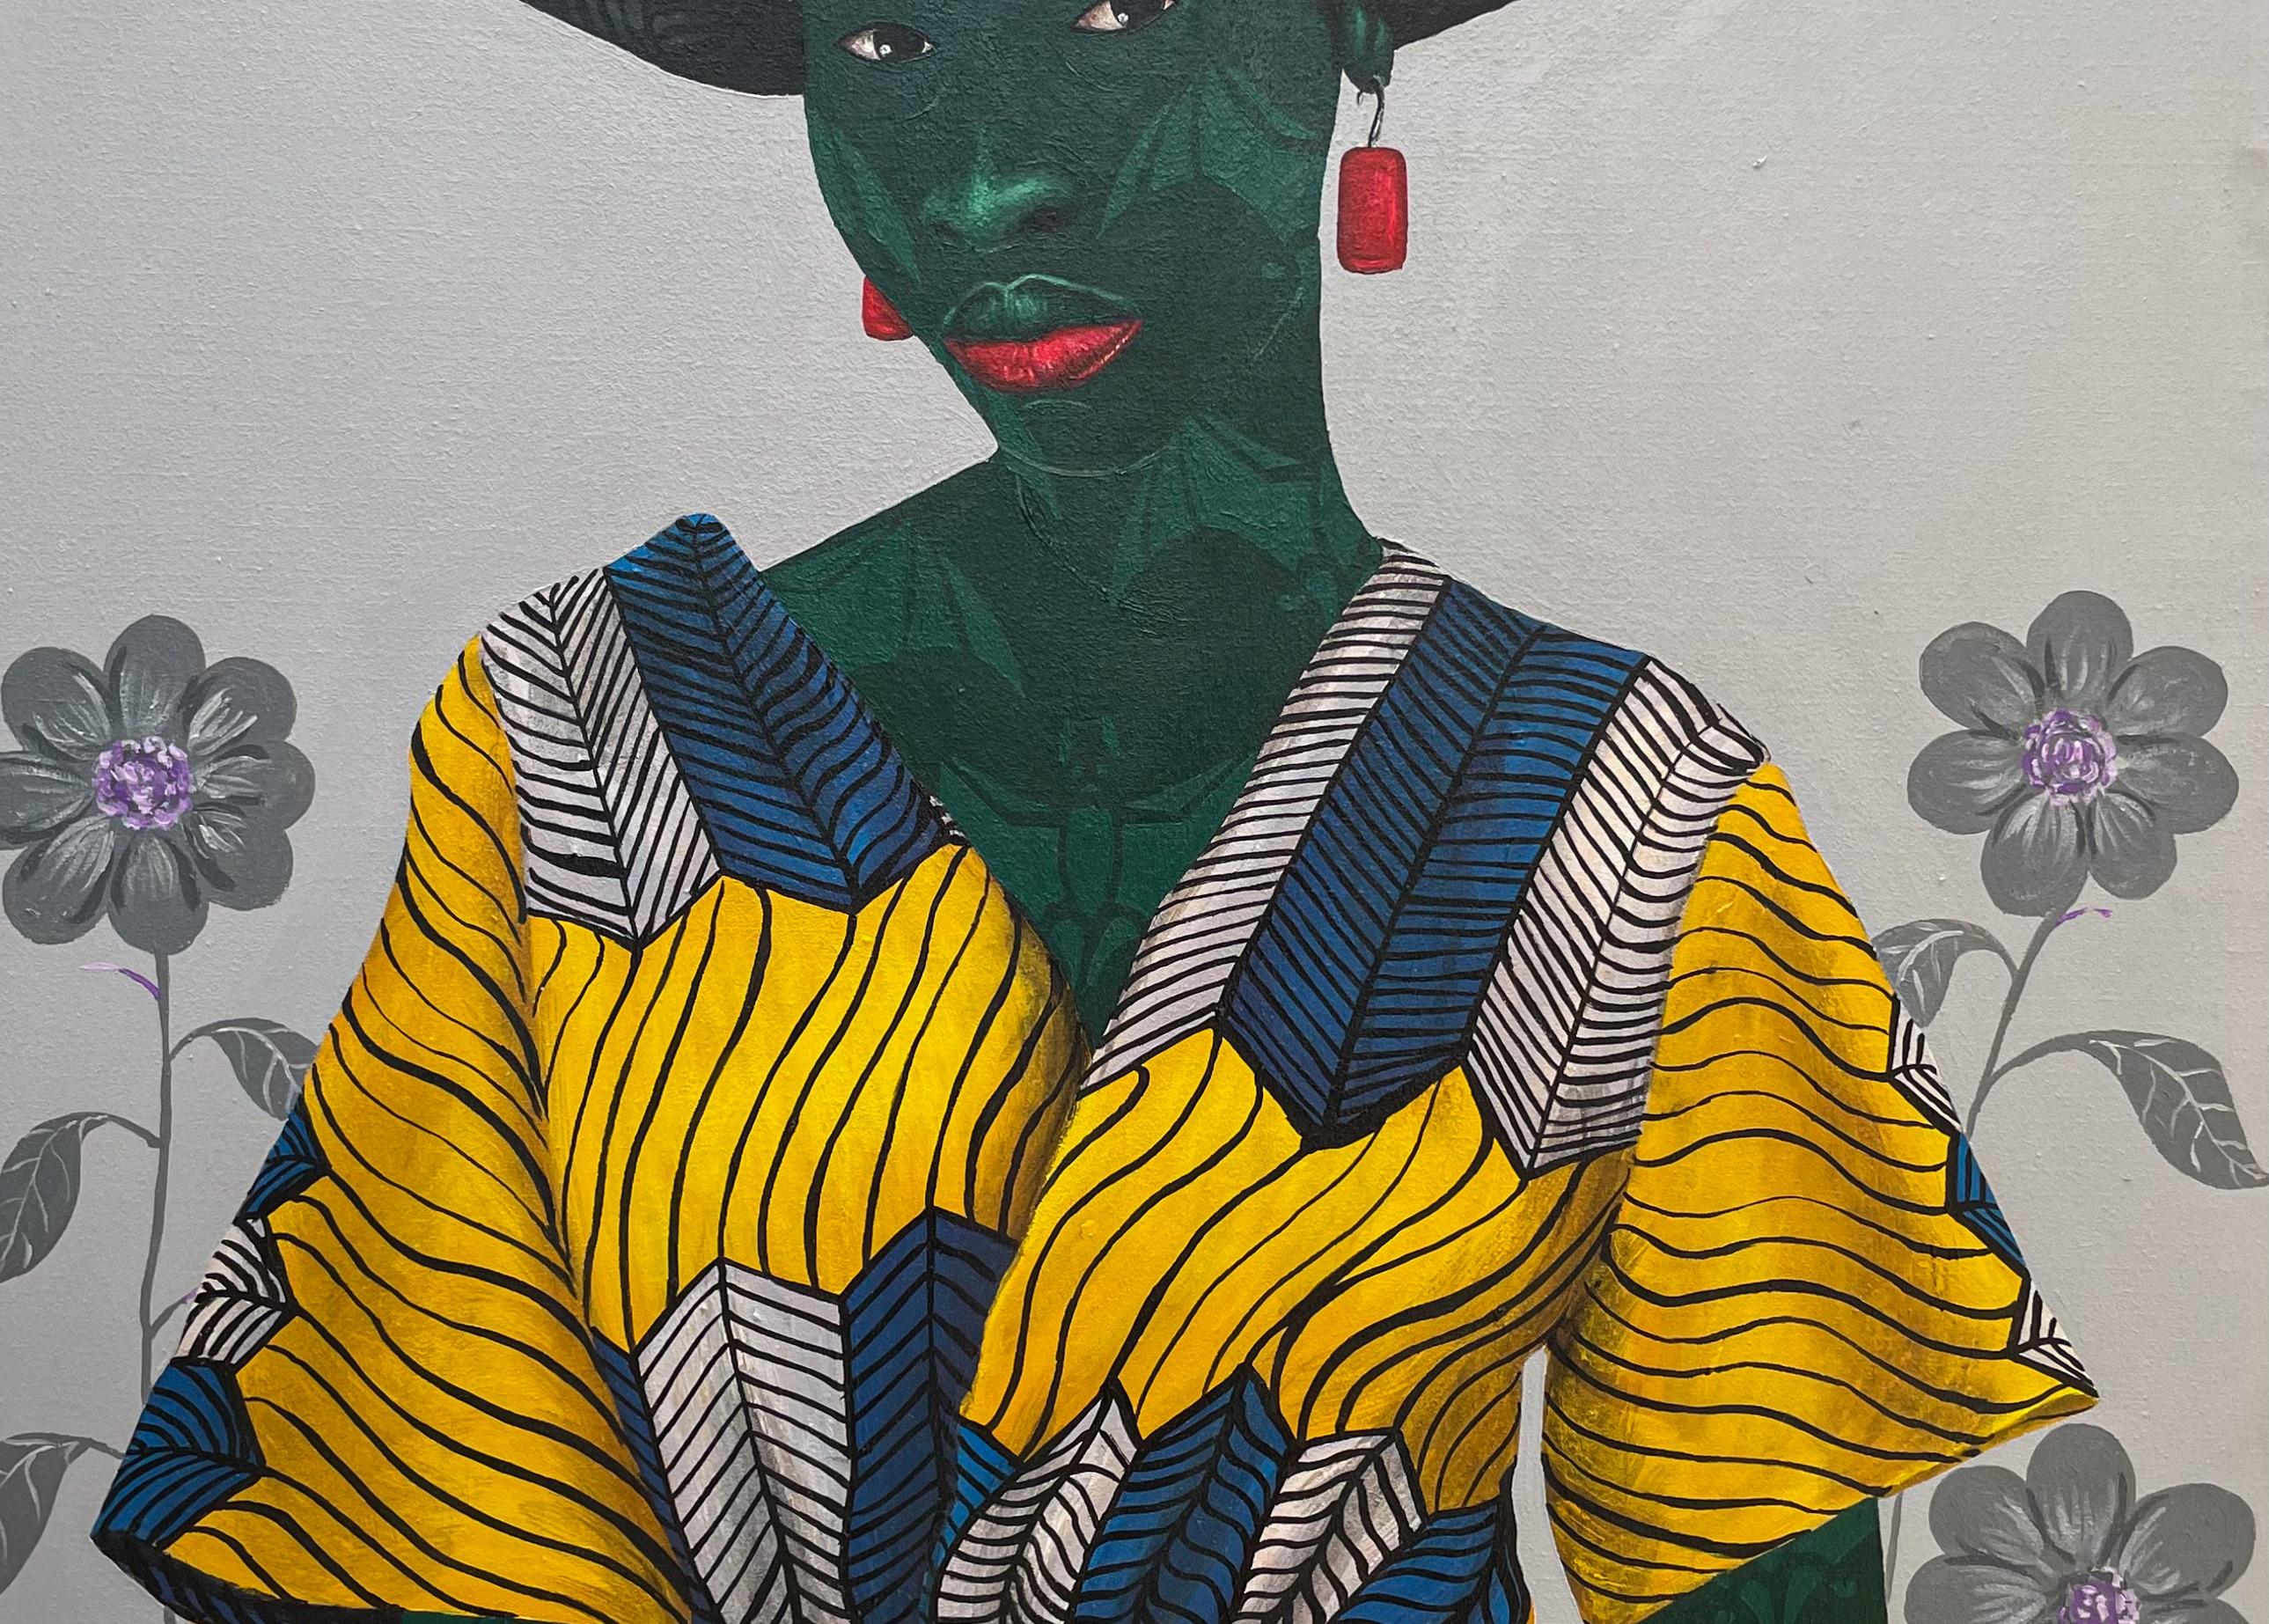 Fortitude (Expressionismus), Painting, von Oluwafemi Afolabi